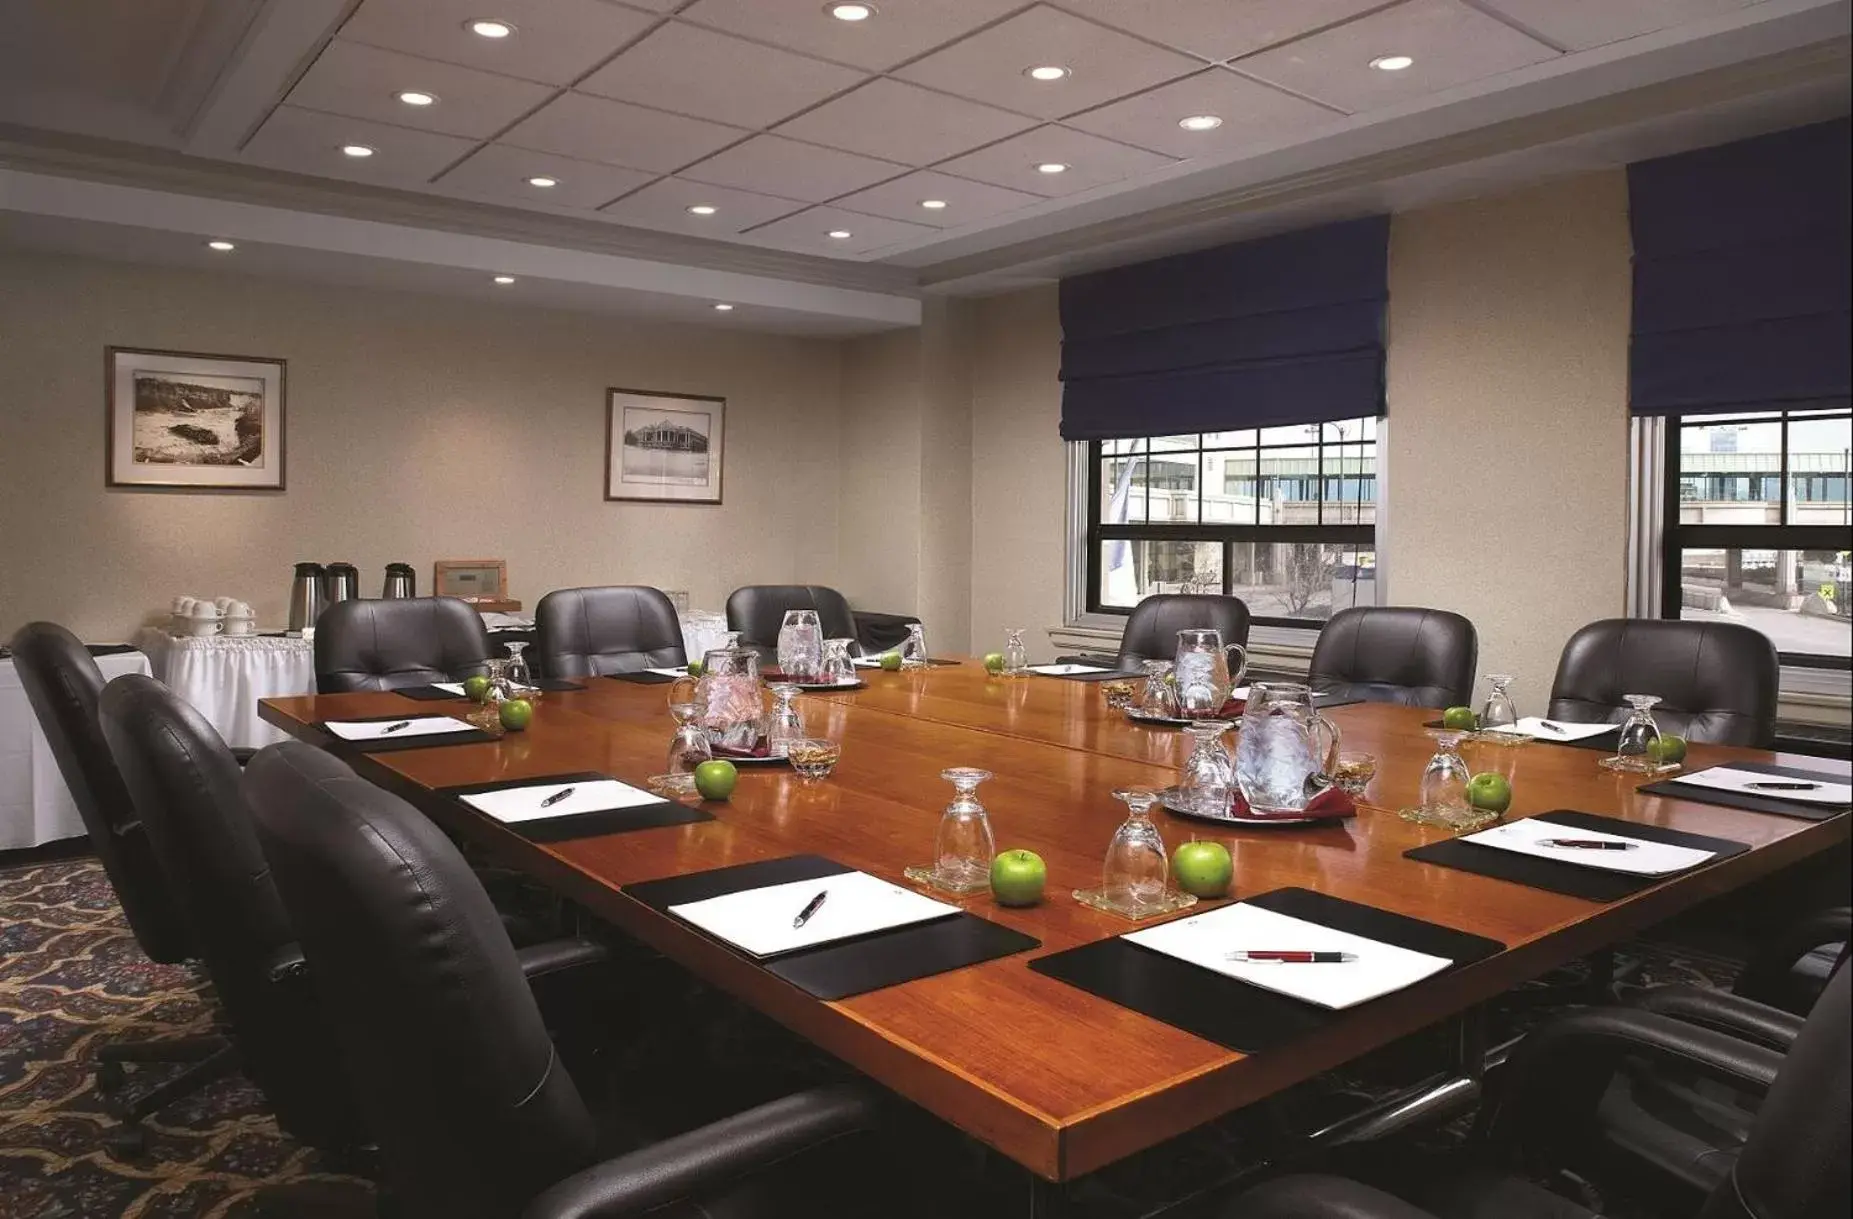 Meeting/conference room in Crowne Plaza Hotel-Niagara Falls/Falls View, an IHG Hotel